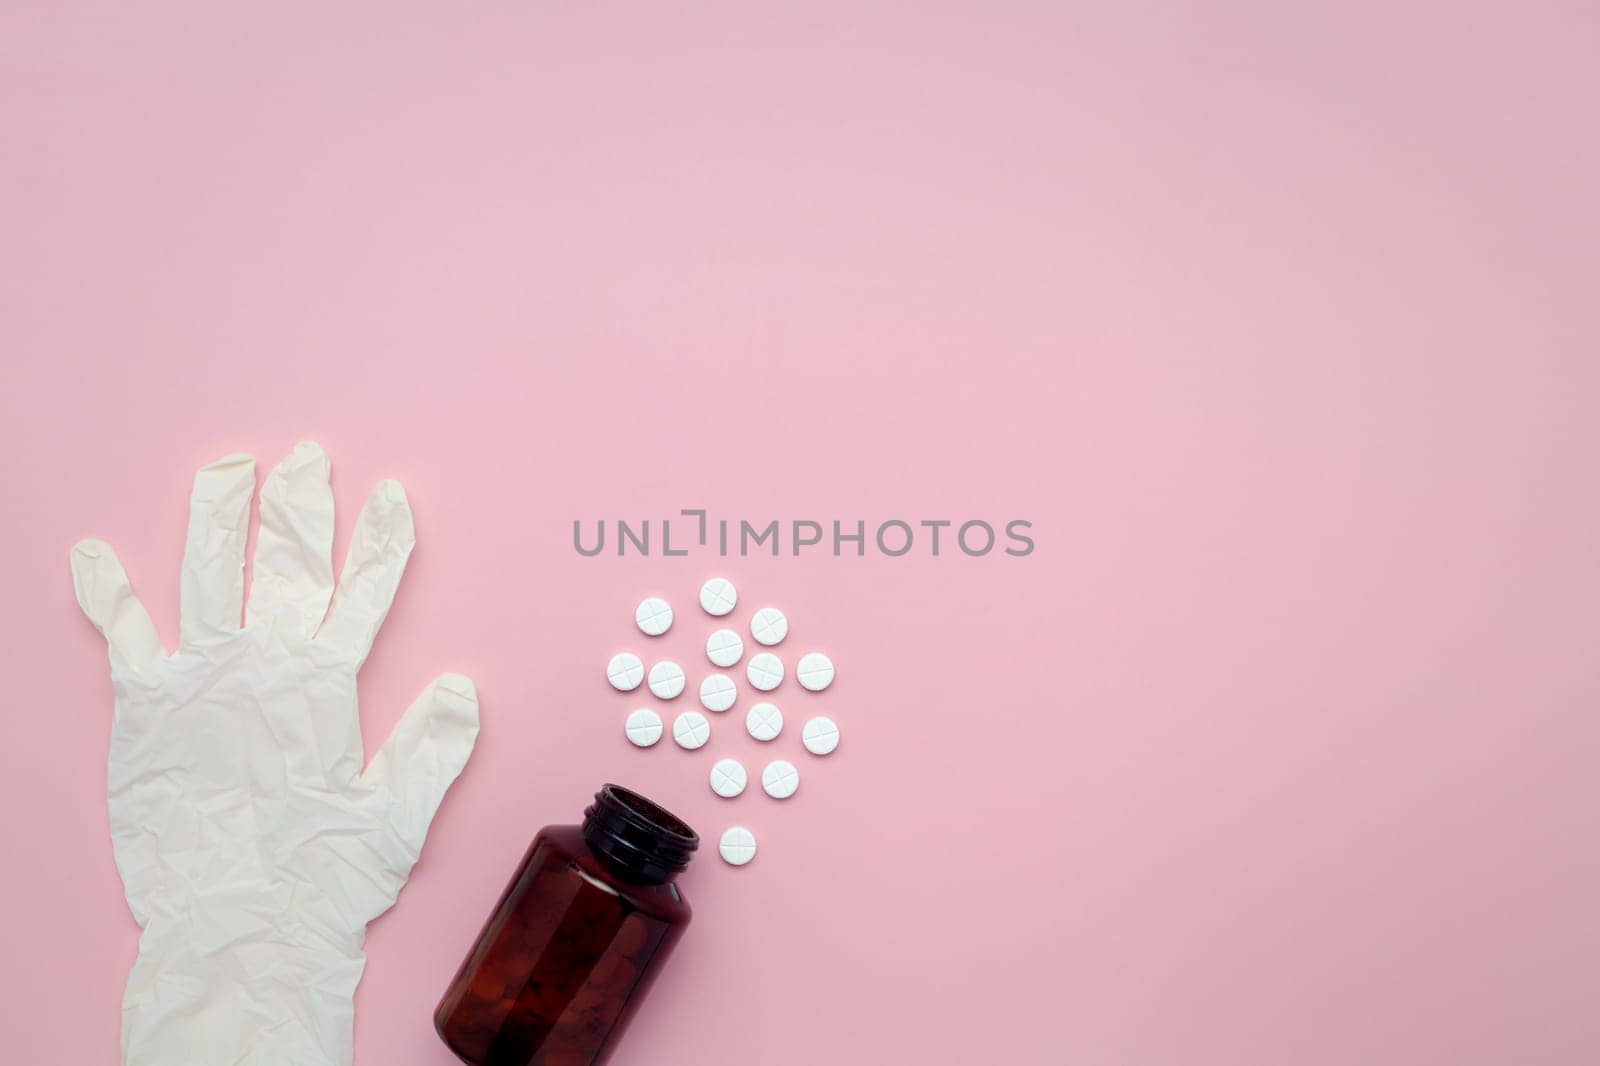 Flat lay of a bottle of medicine, pills, and latex gloves on a pink background for the concept of medical and healthcare